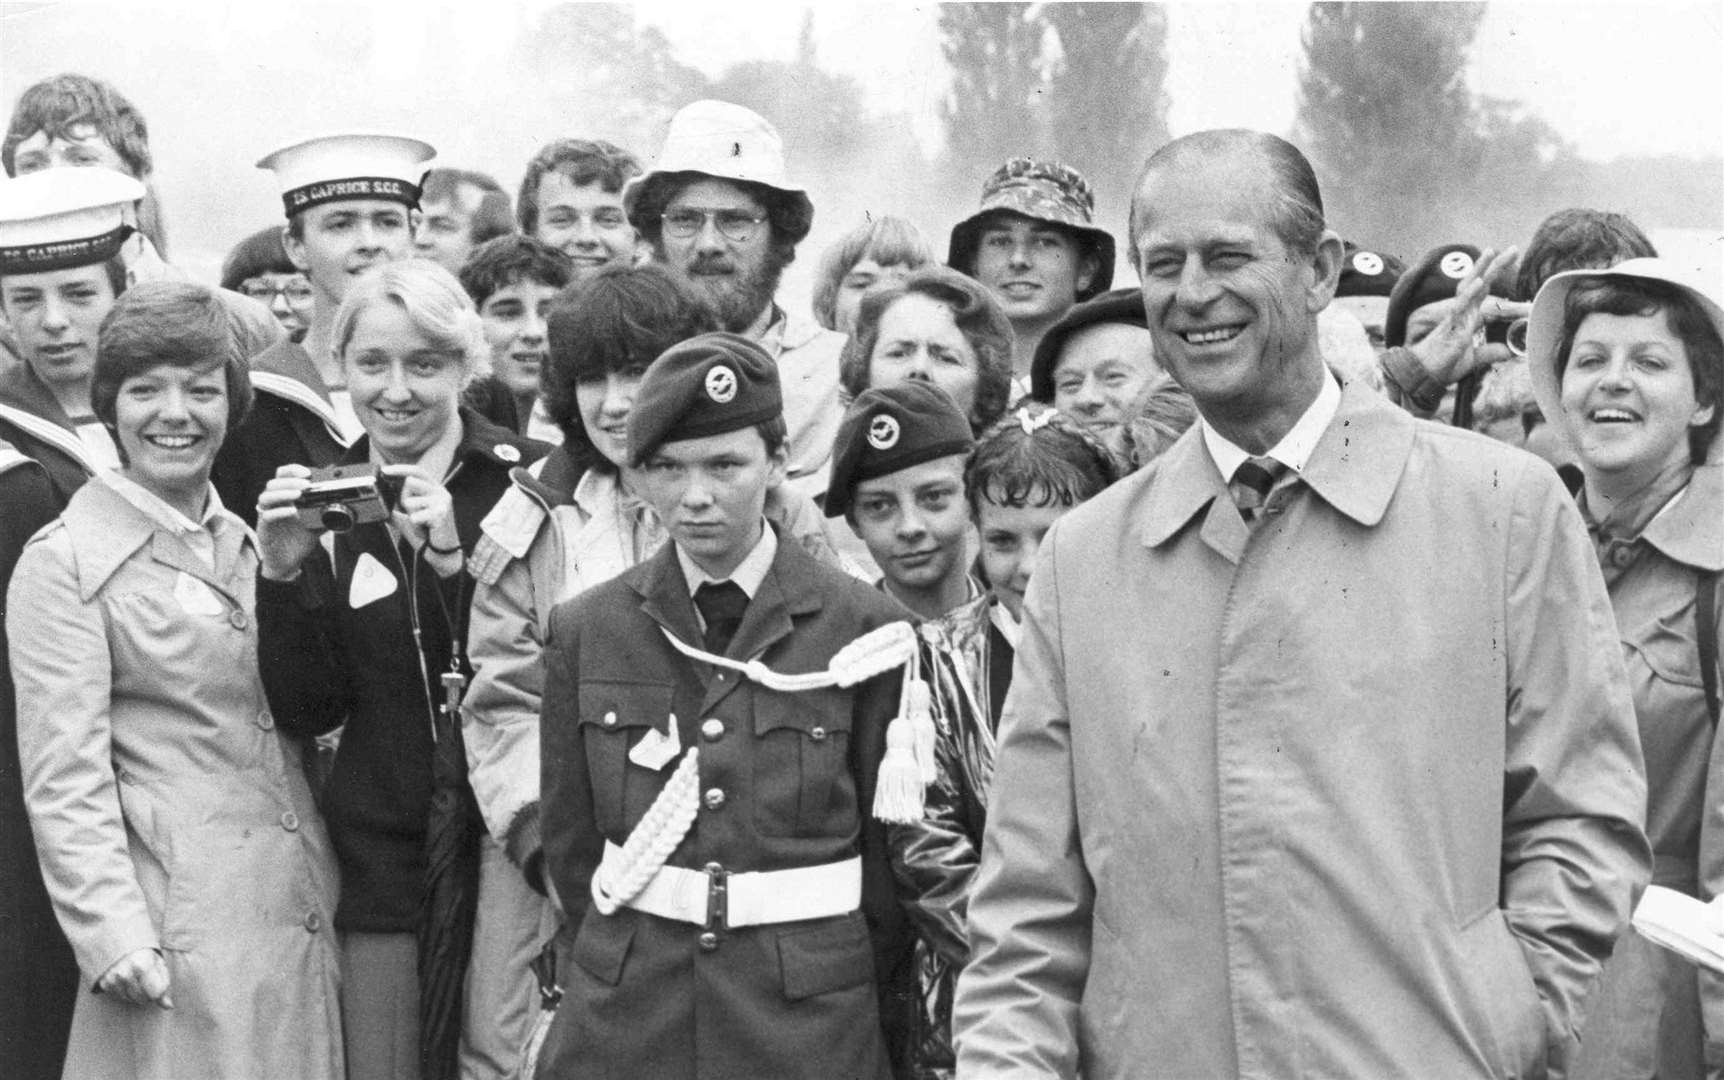 Pouring rain could not dampen the enthusiasm of 7,000 youngsters who gathered at Hever Castle in June 1981 to celebrate the 25th anniversary of the Duke of Edinburgh Award Scheme with the help of the Duke himself